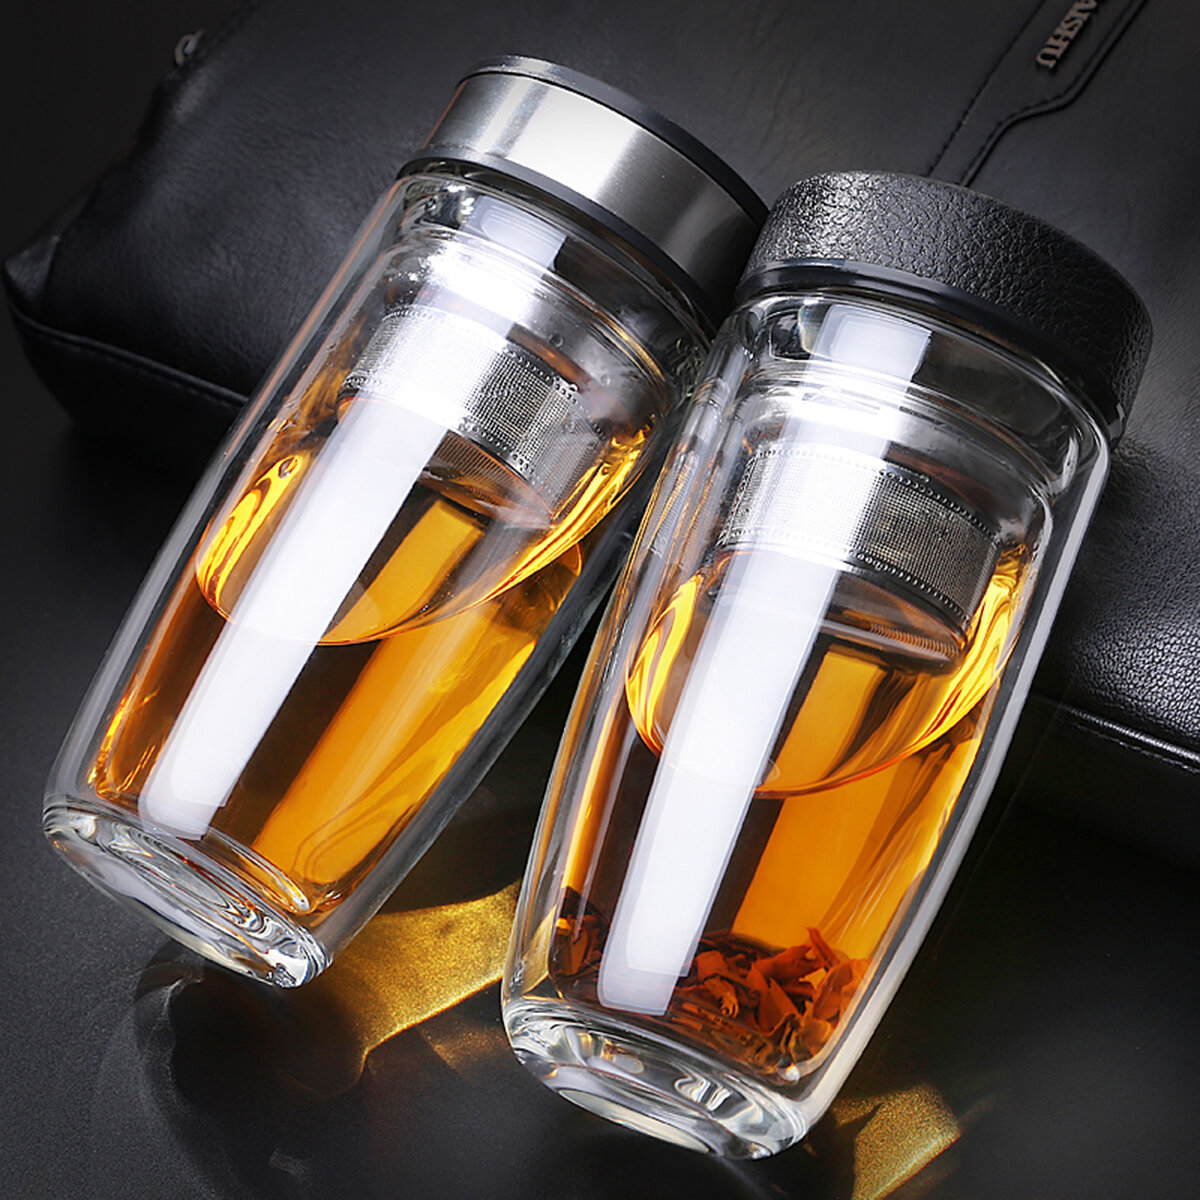 

380ML Double Wall Glass Tea Tumbler Water Bottle with Filter Infuser Travel Mug